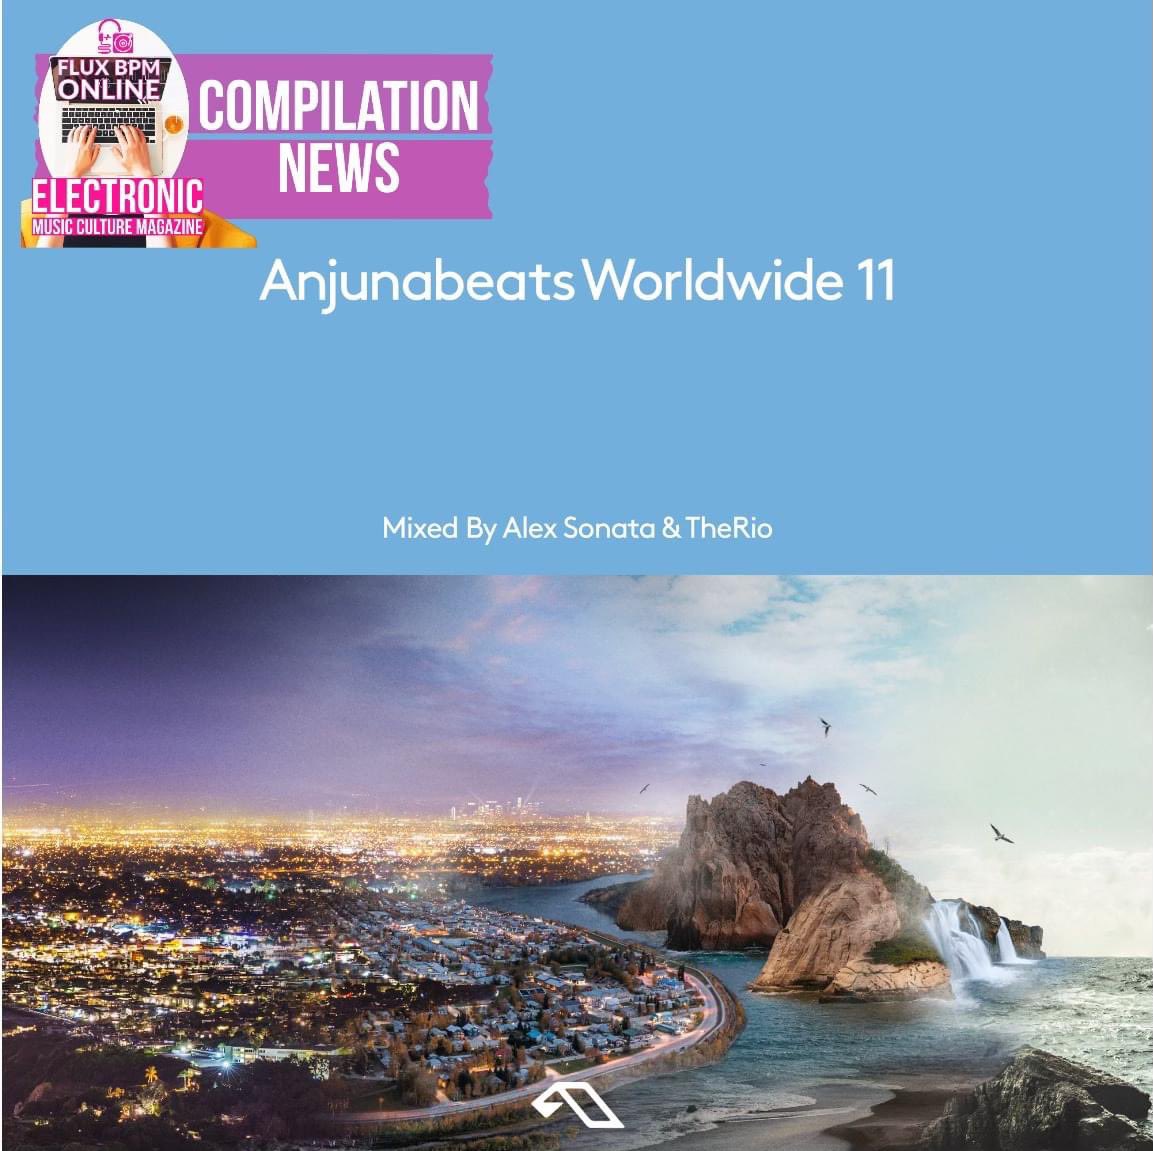 COMPILATION: @Anjunabeats Worldwide Vol.11 mixed by @sonata_therio out now @aboveandbeyond fluxbpmonline.blogspot.com/2023/11/compil… awesome selection of top tracks to keep dancing for hours @abgrouptherapy @Onemixradio @1mixTrance @djoliversmith @iBluestone @jordinpost @JasonRossOfc